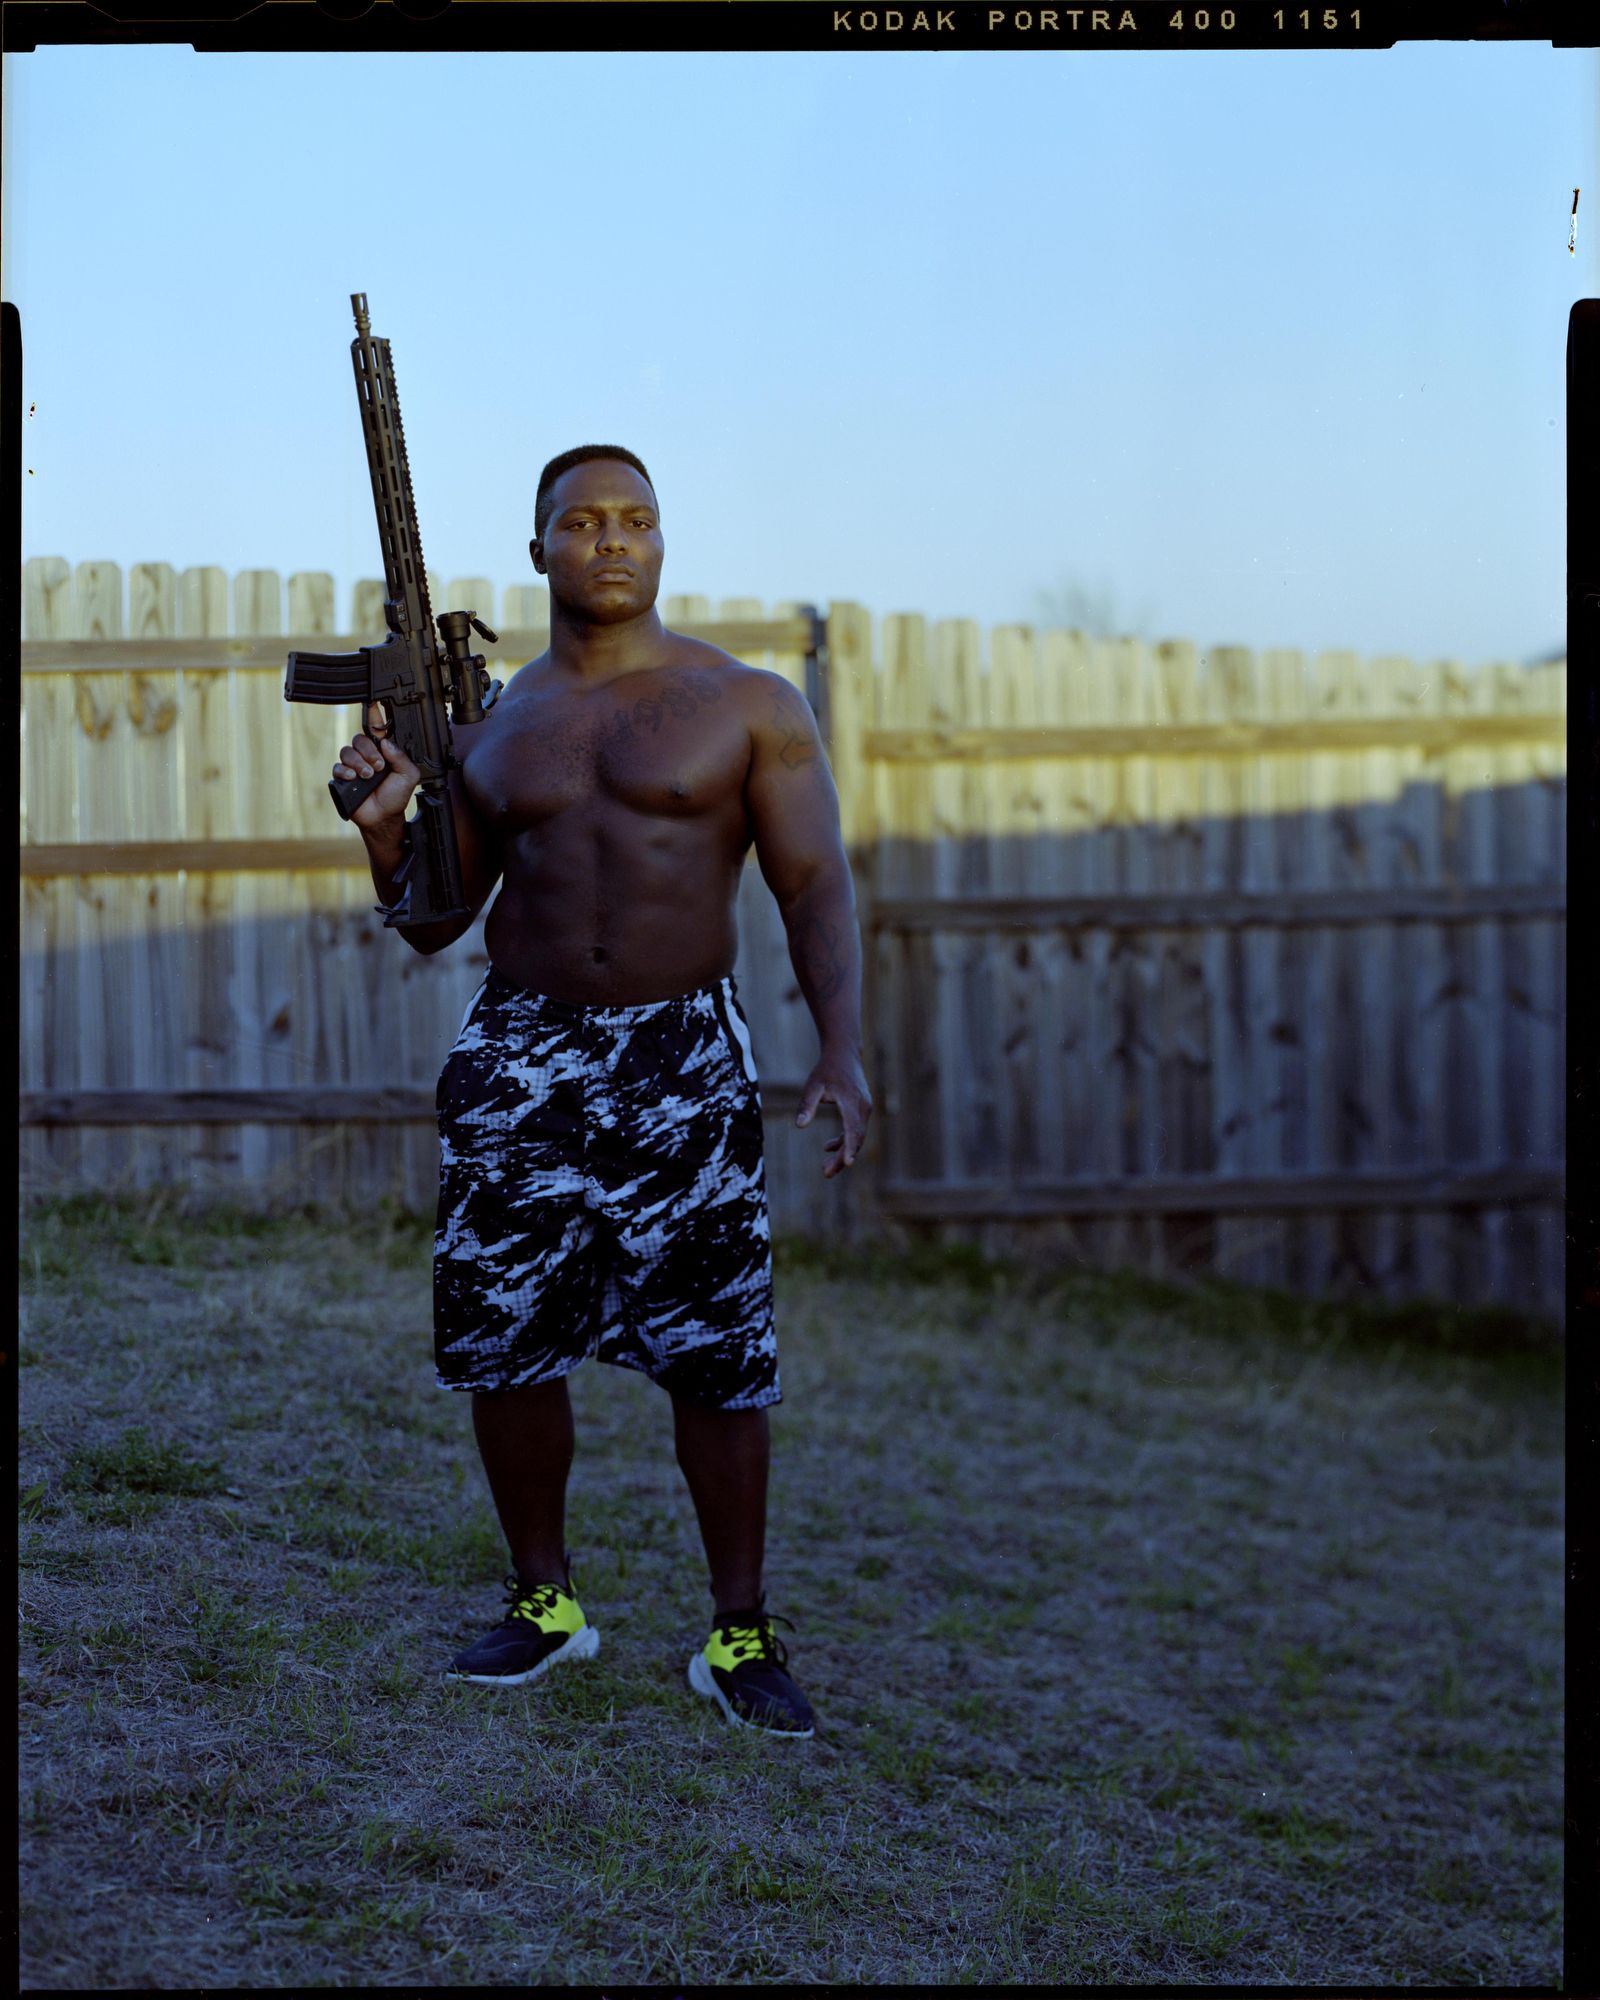 © Christian K. Lee - Image from the Armed Doesn't Mean Dangerous photography project